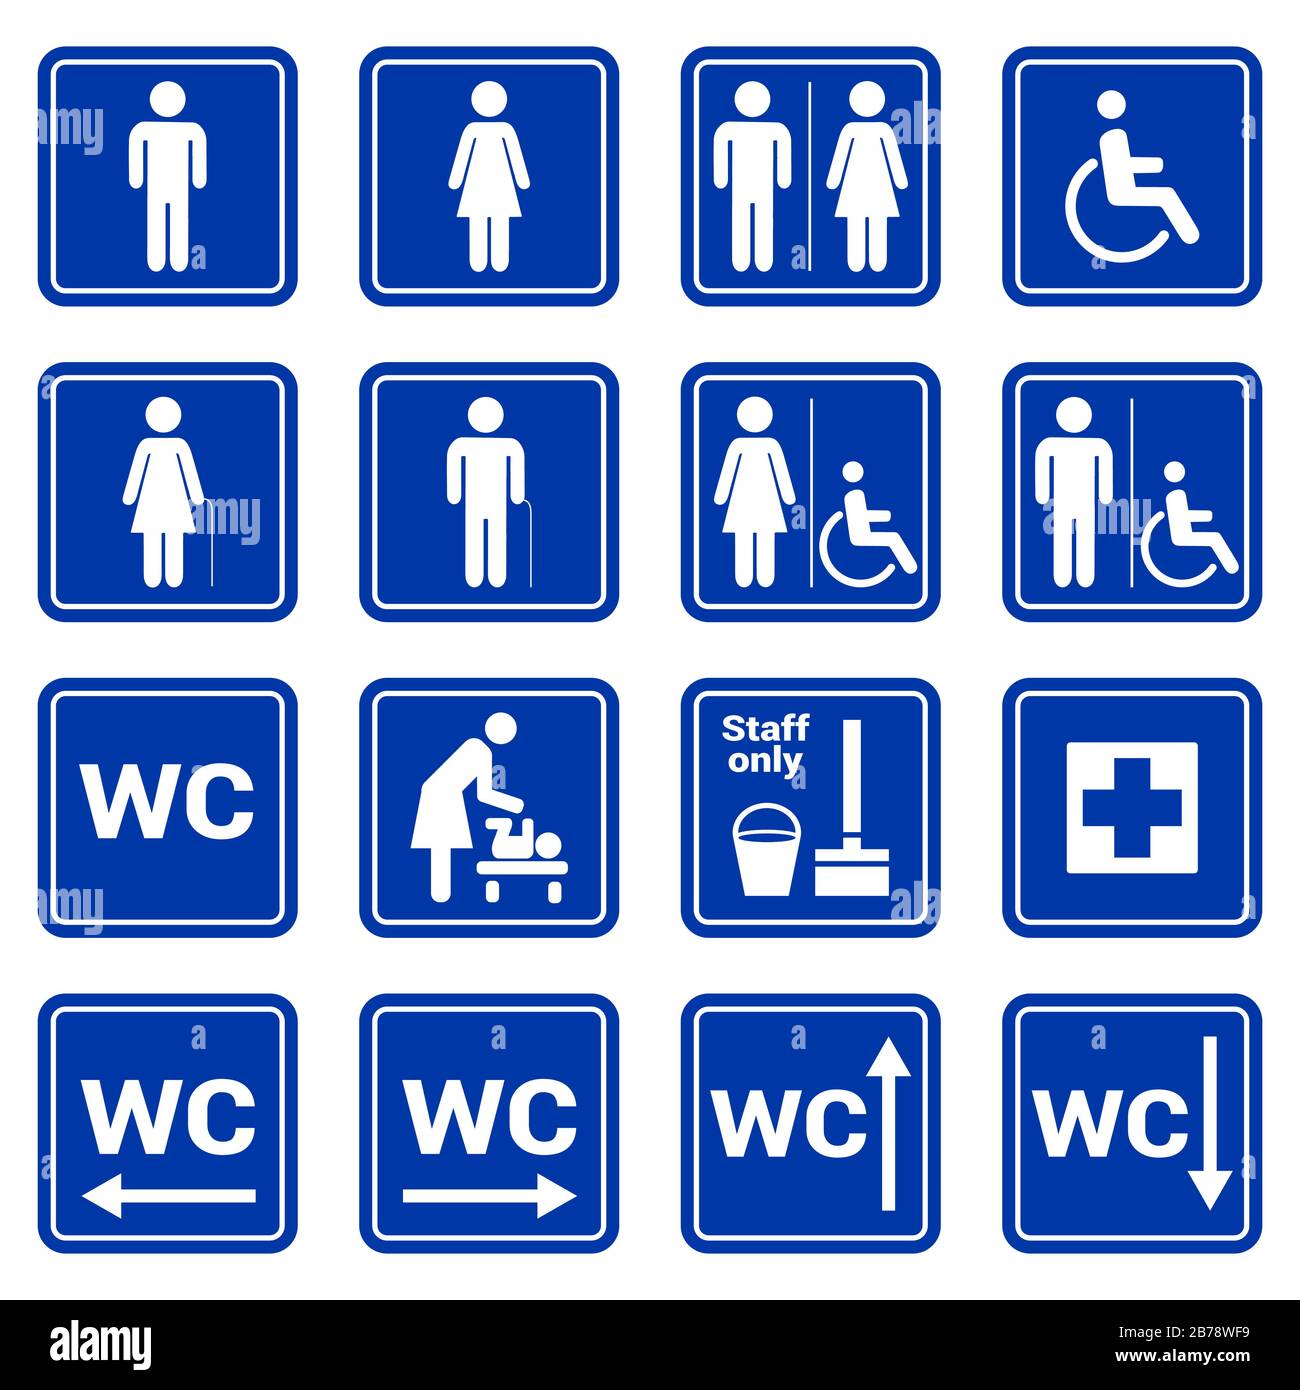 Set of vector white toilet symbols icons on a blue background. WC pictogram, man, woman, handicap, staff, nursery, first aid. Squared icon with border Stock Vector